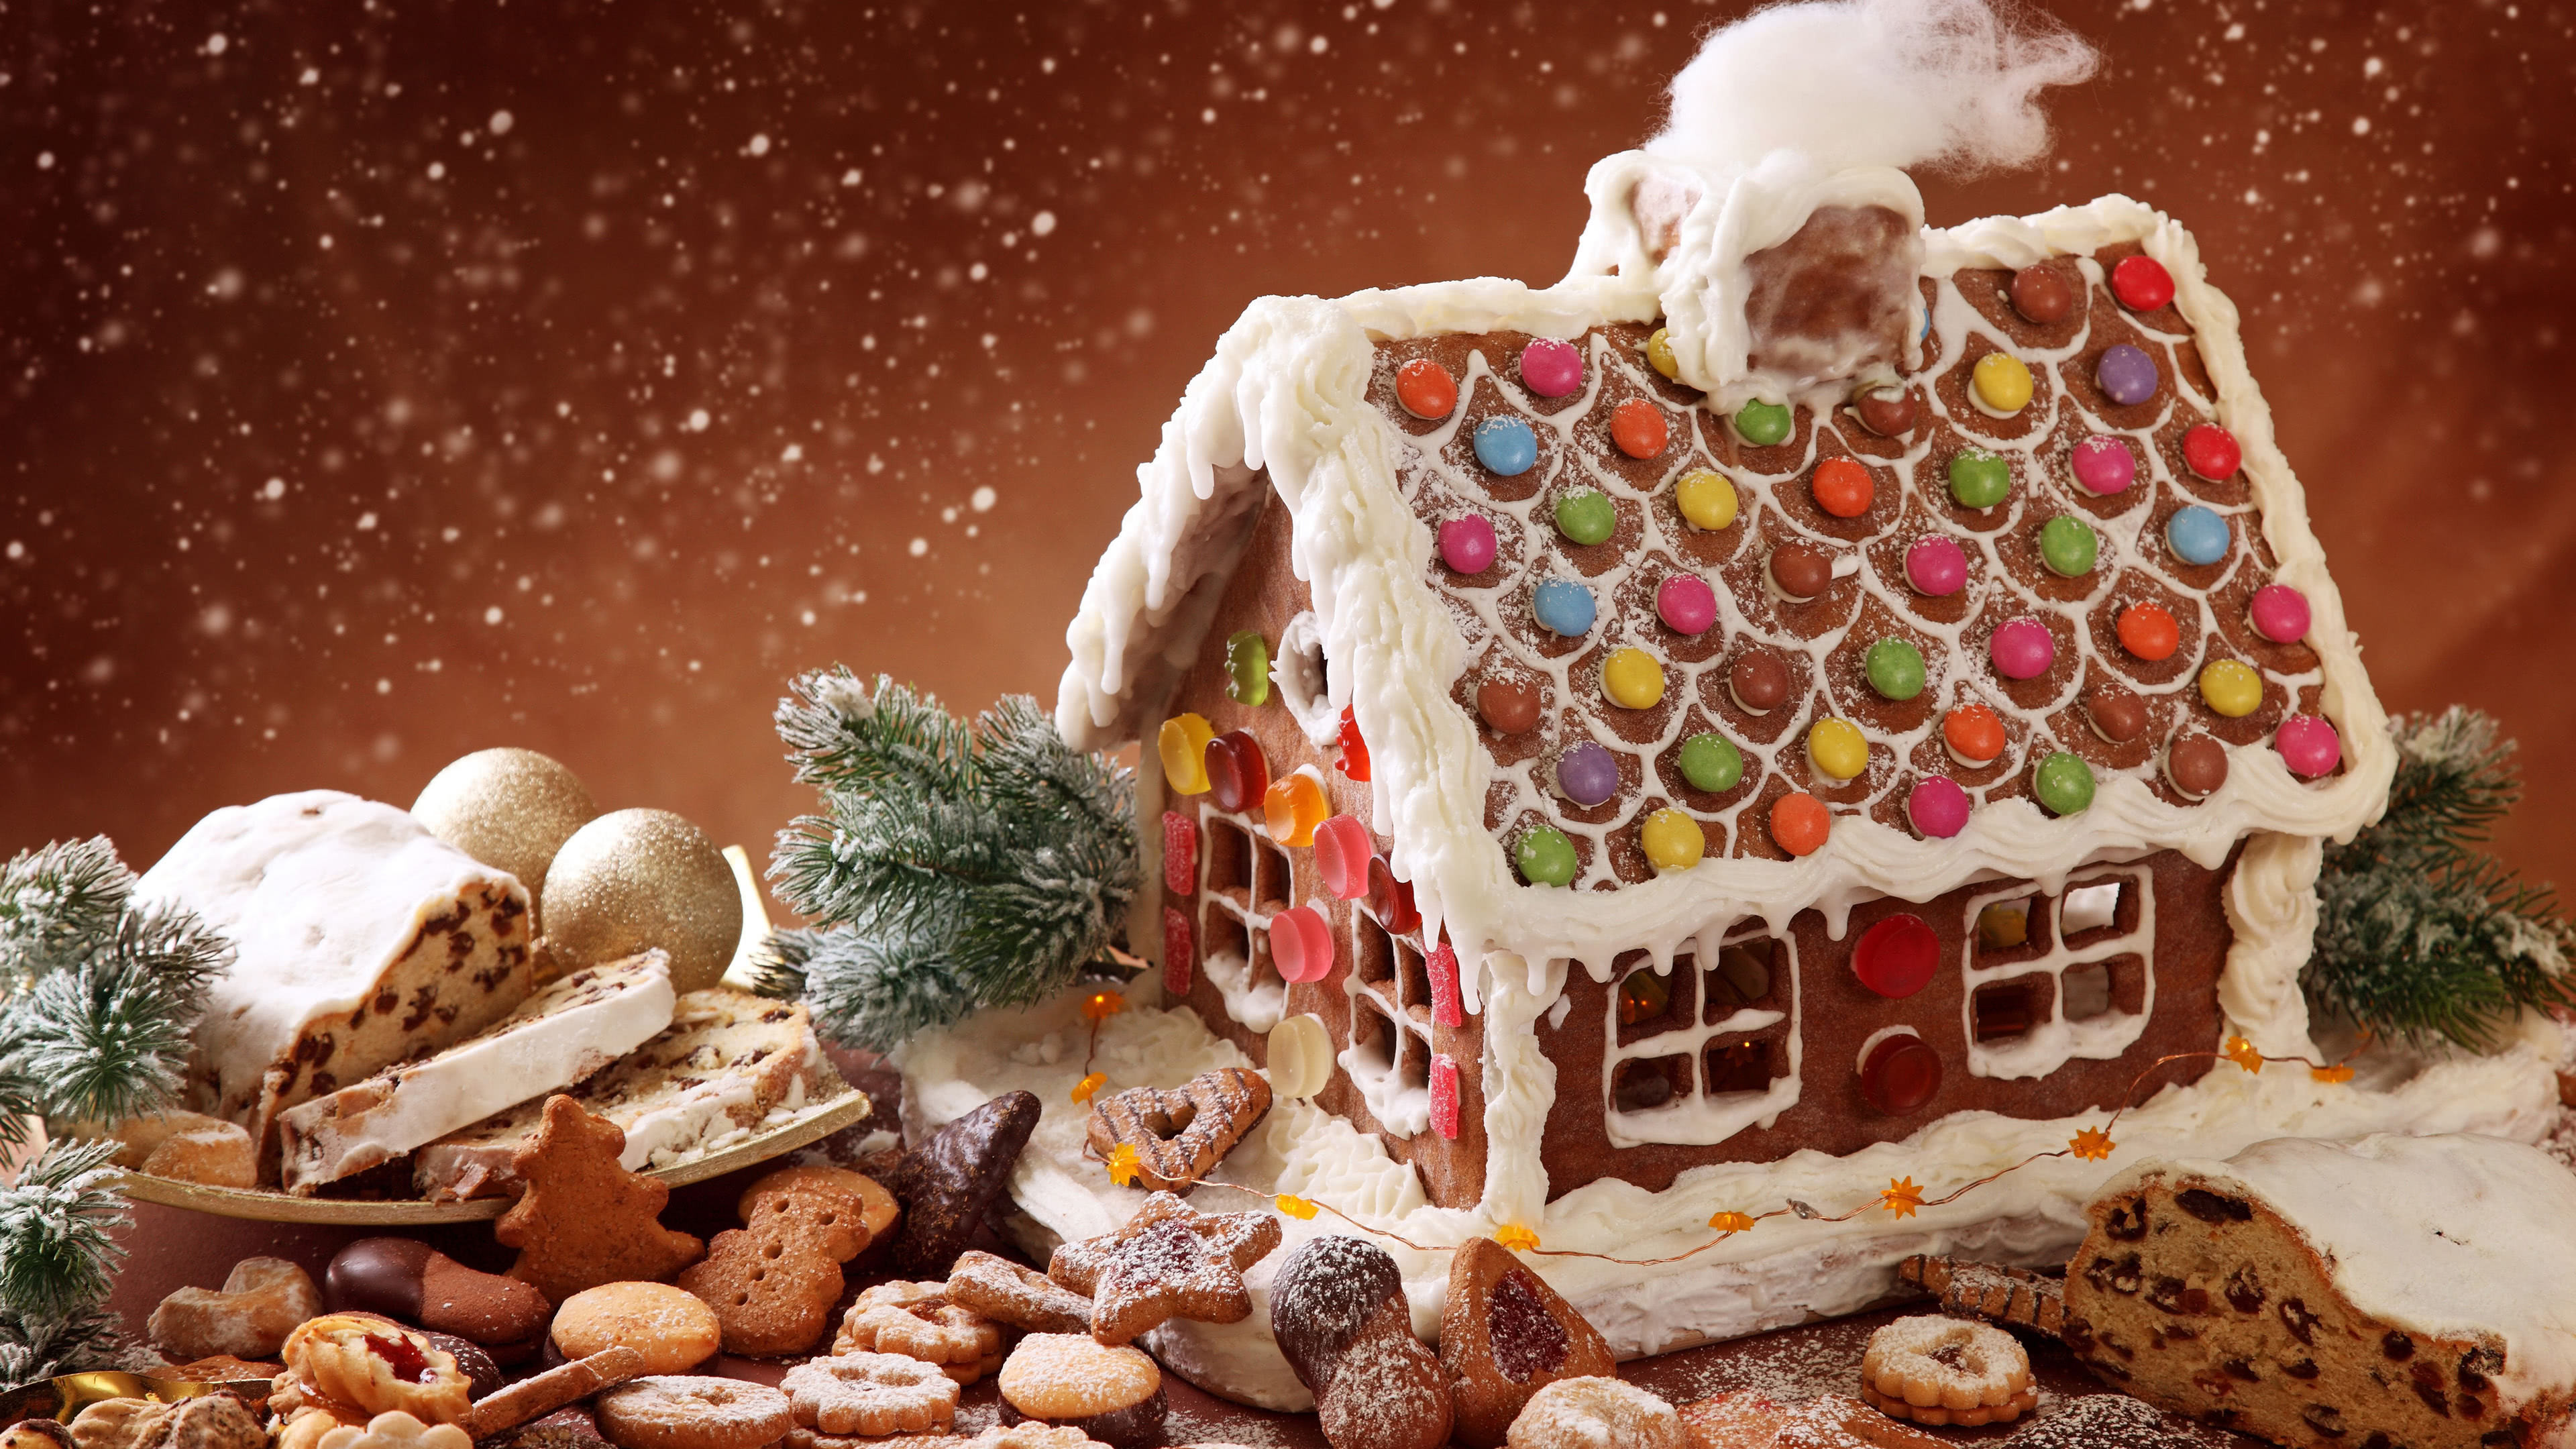 gray and beige concrete house during daytime gingerbread house zoom background